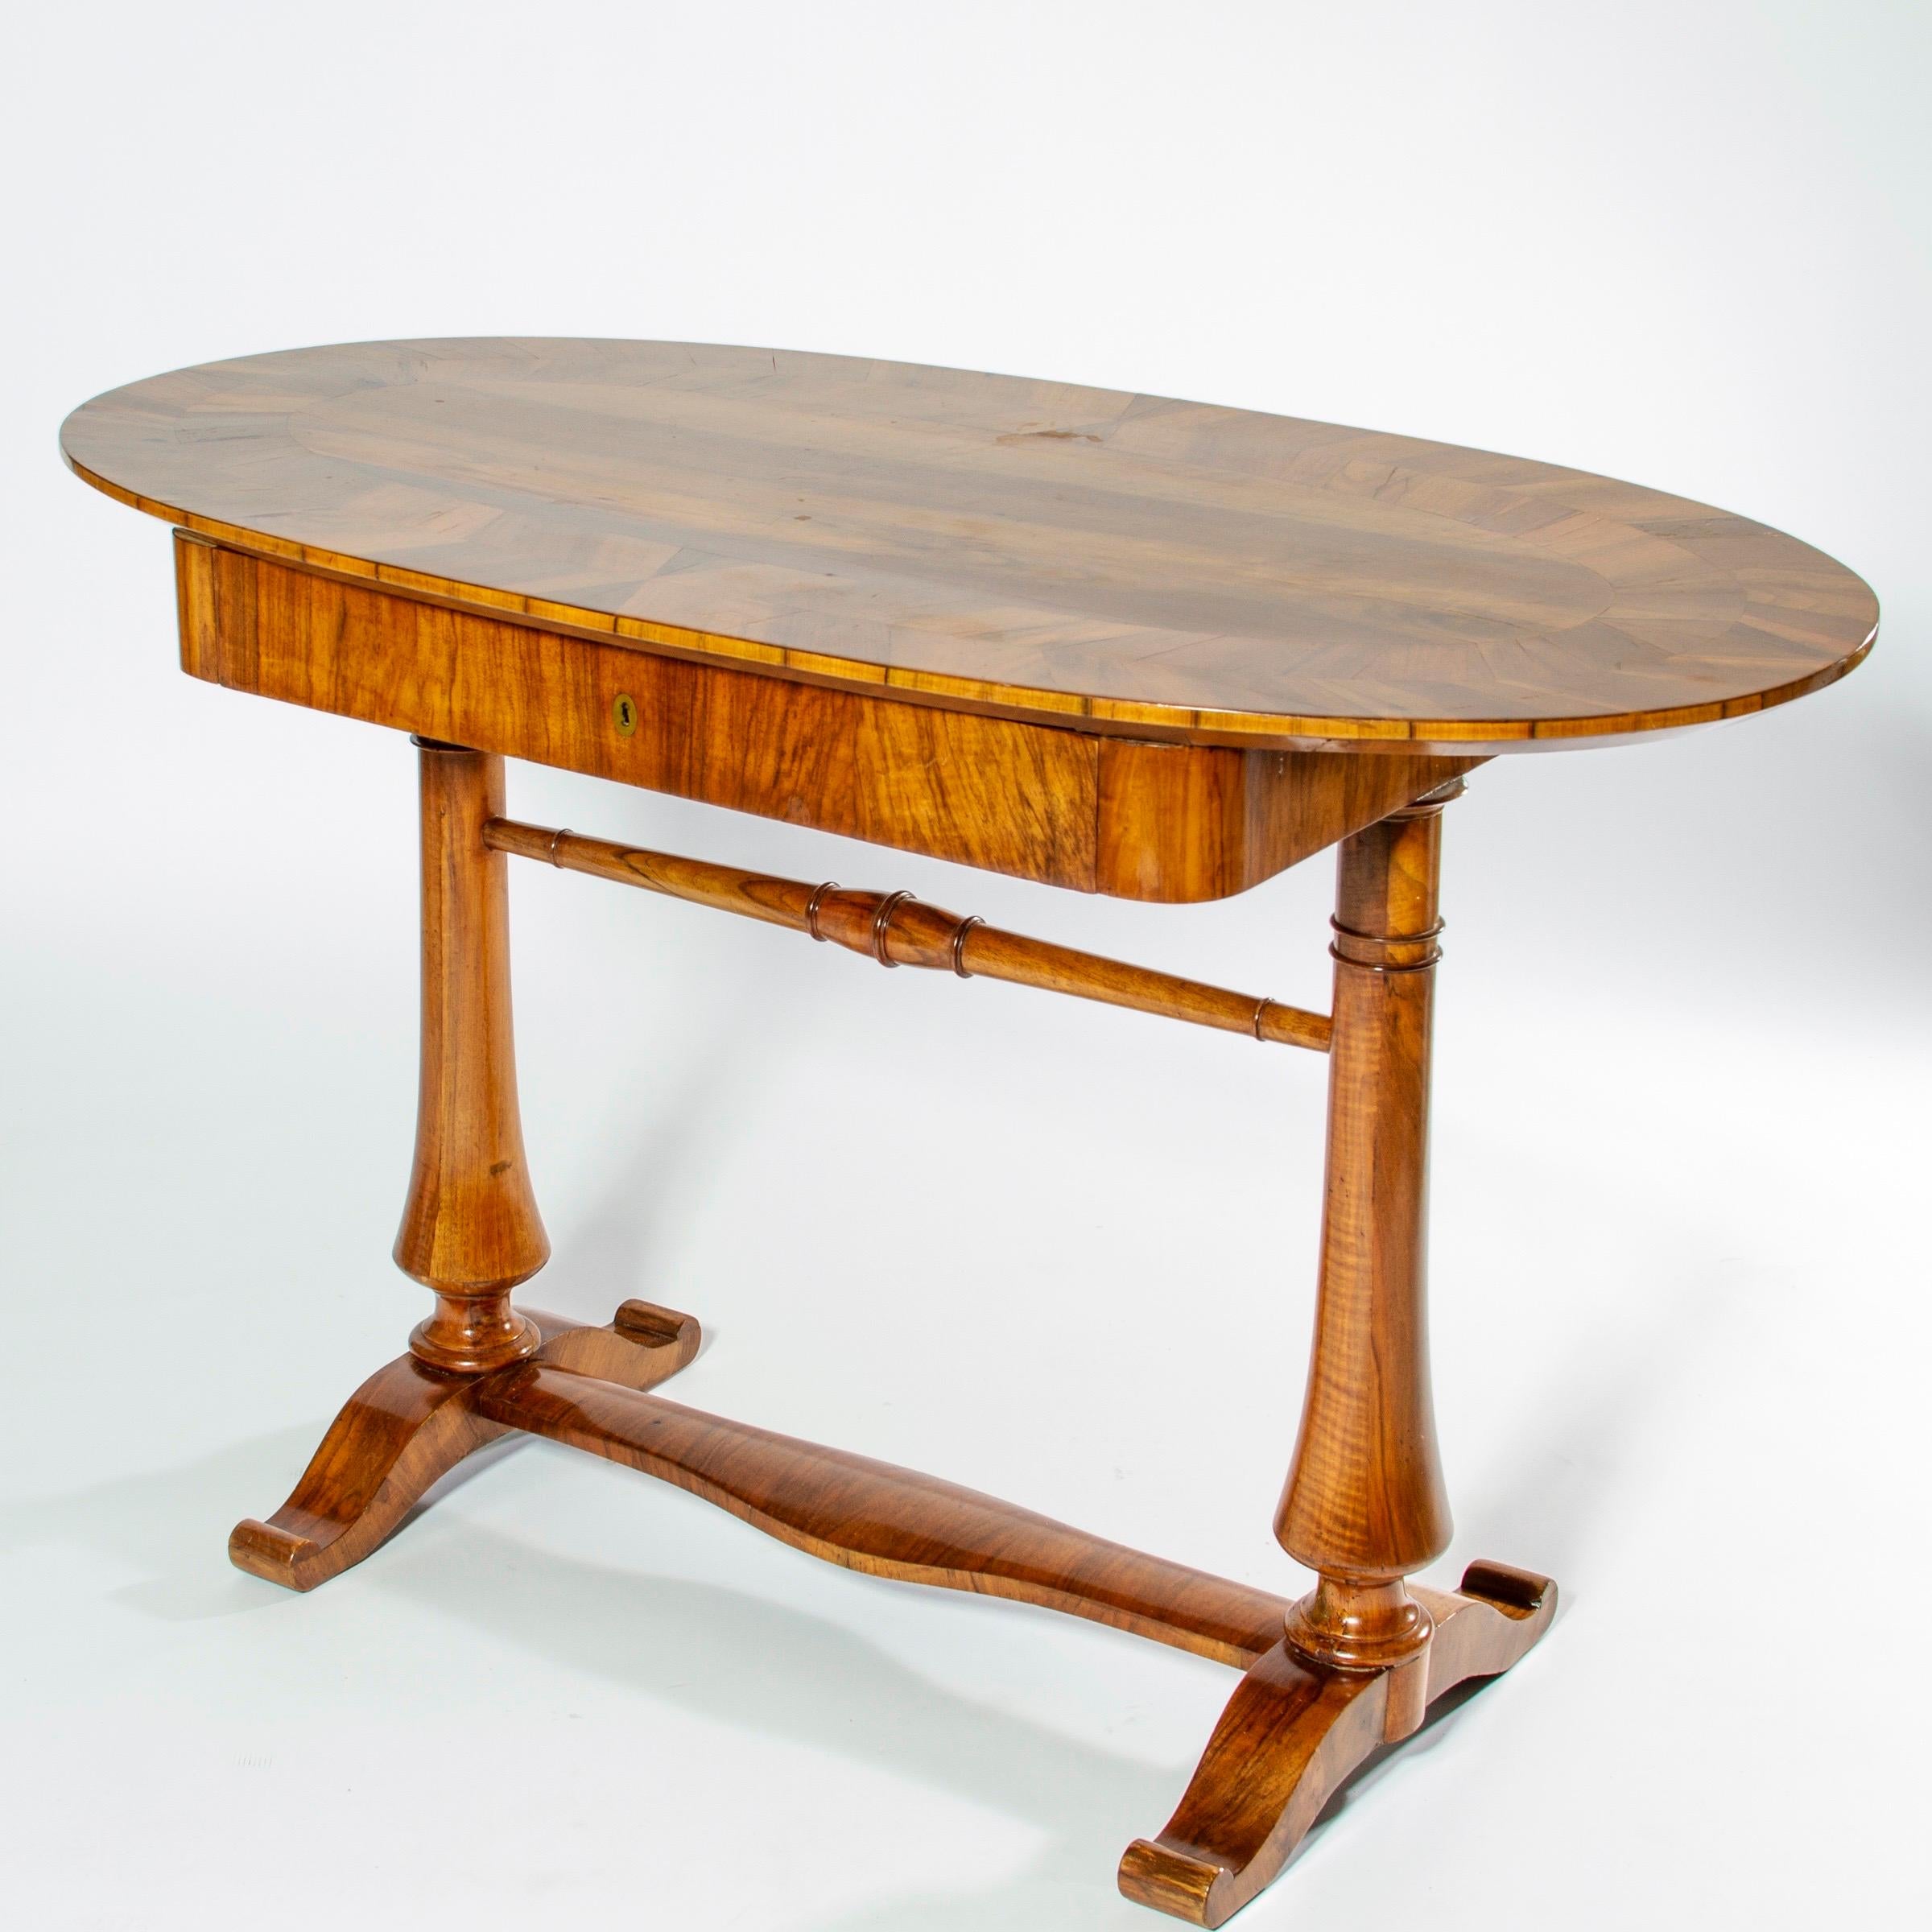 Rare Swedish Biedermeier table or desk rendered in fruitwood with an oval top and hand turned legs, Sweden.